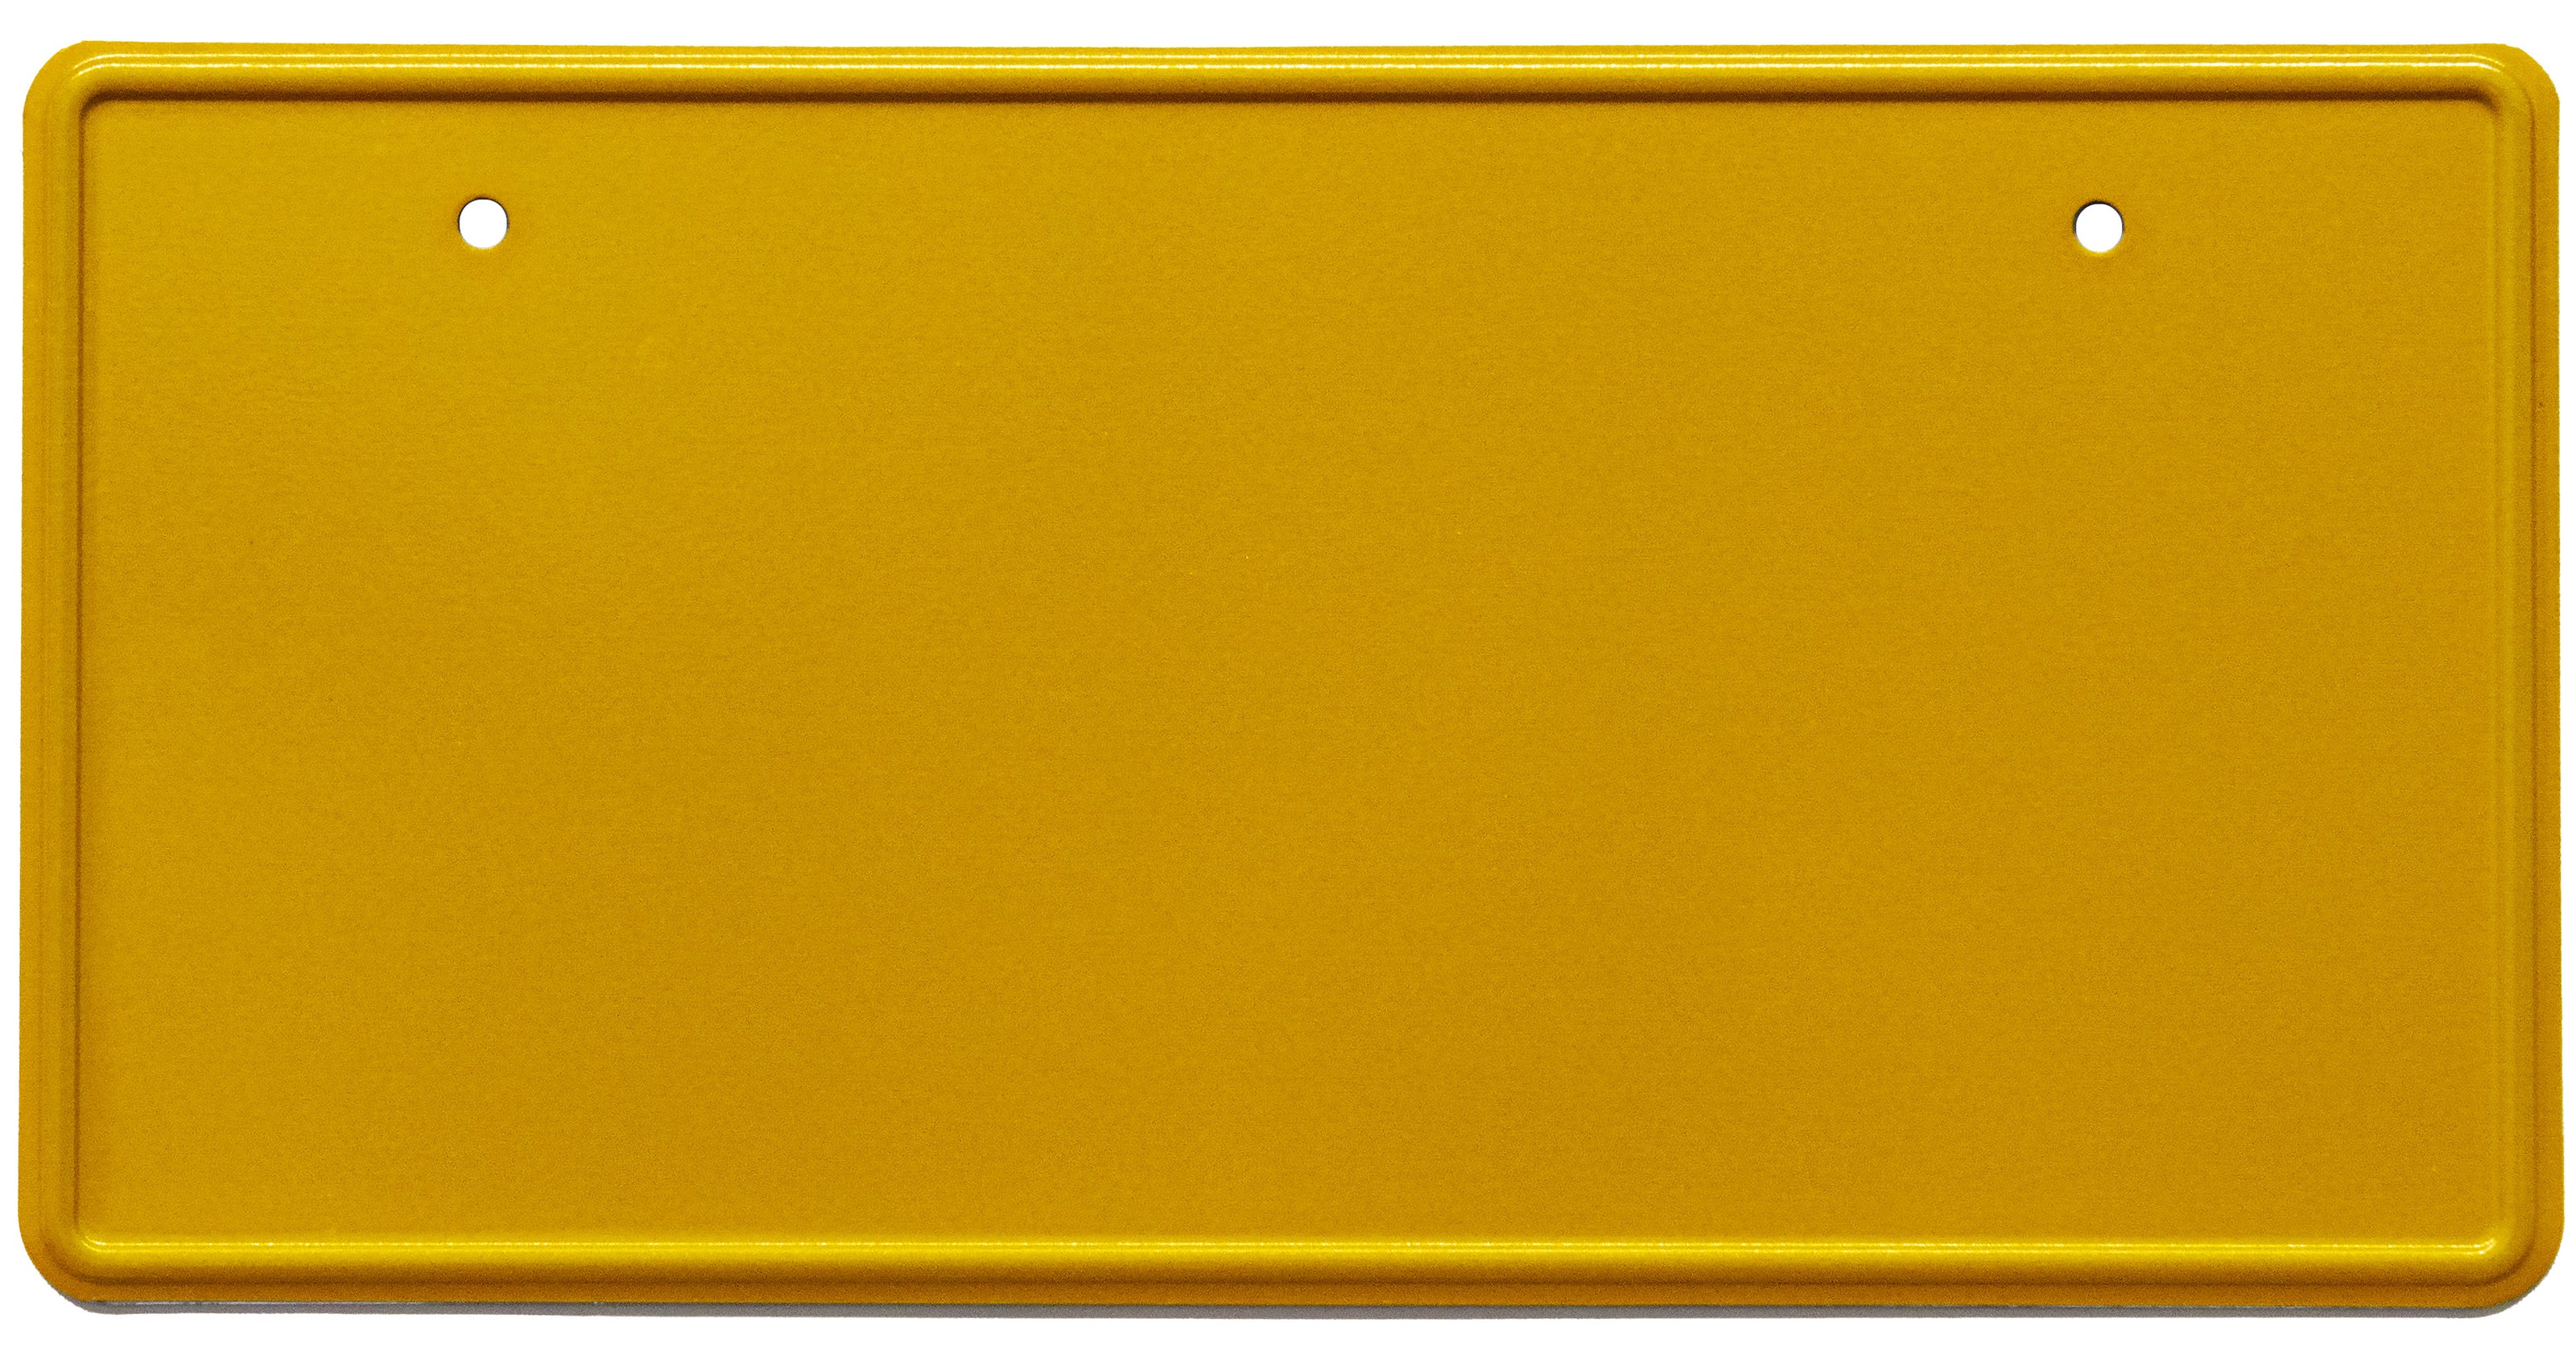 reflective yellow Japanese license plate